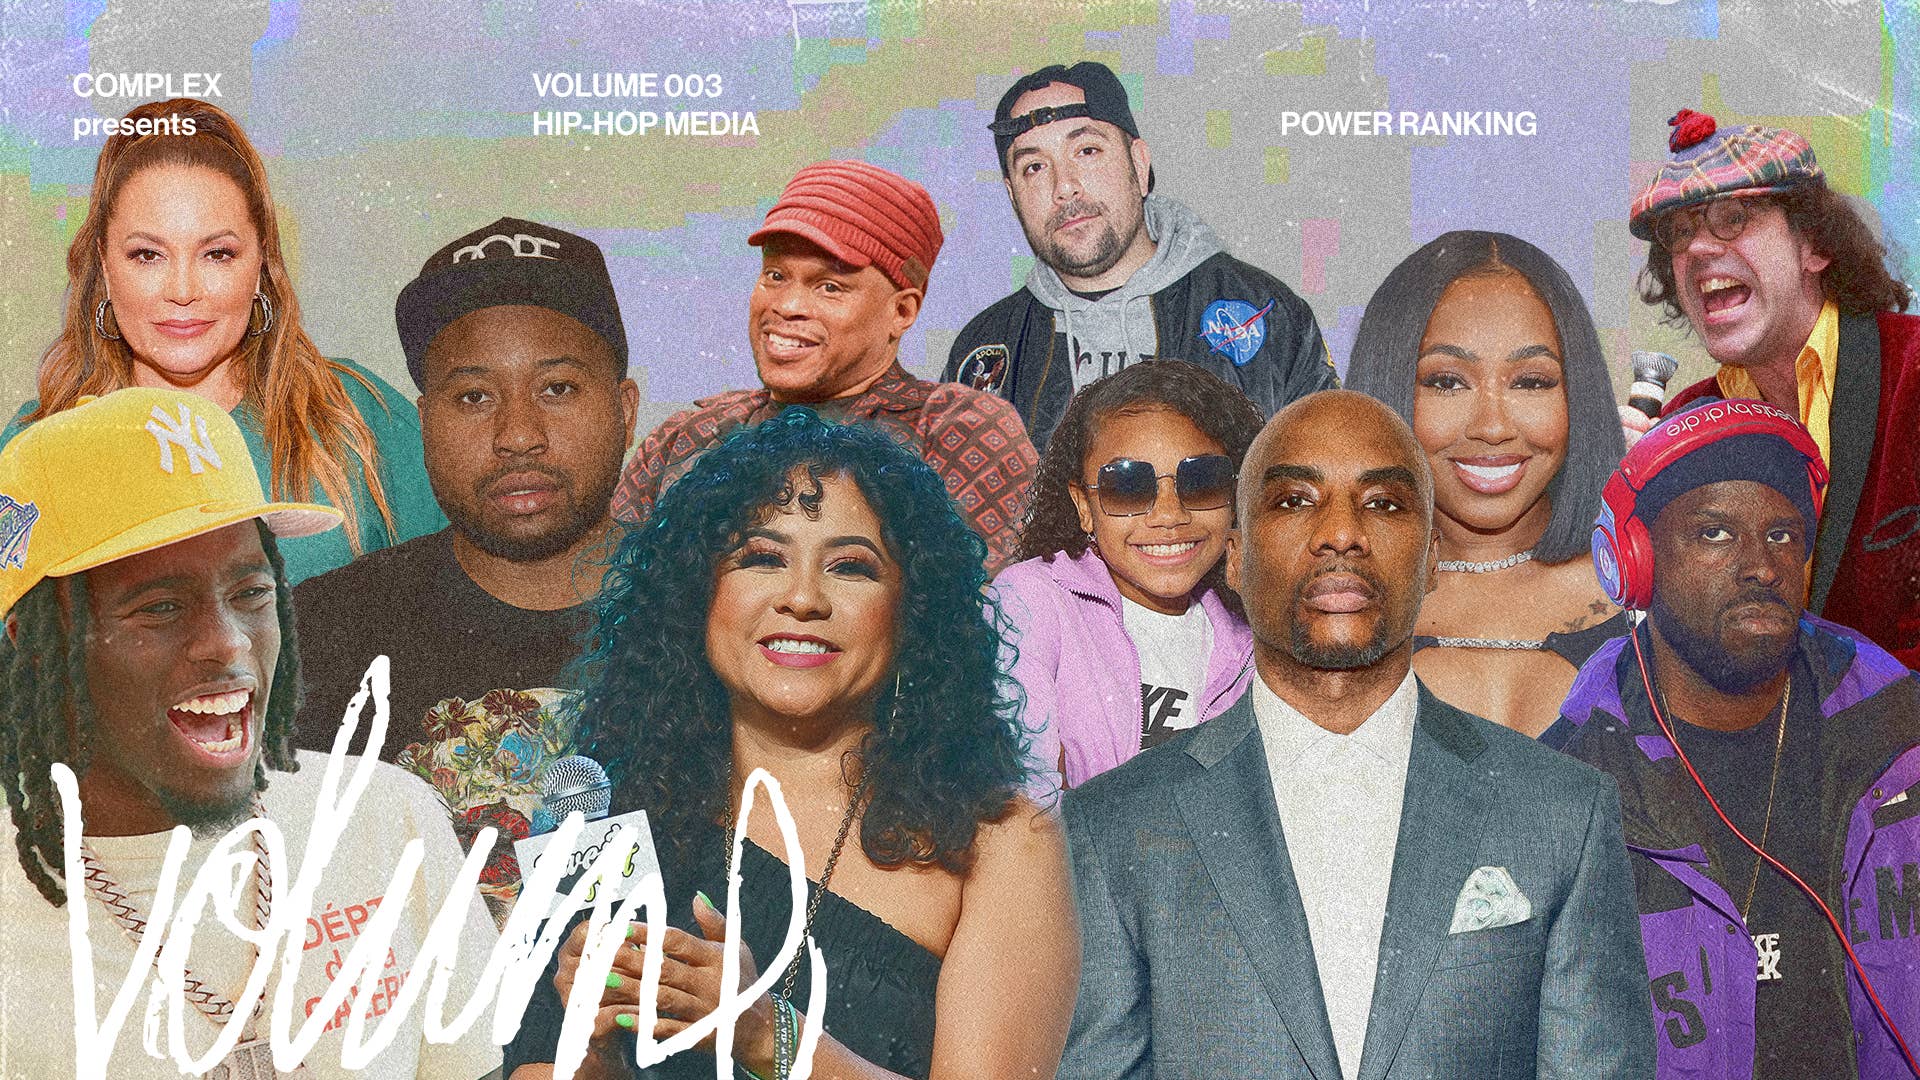 Hip hop's biggest stars turned the Super Bowl into the ultimate